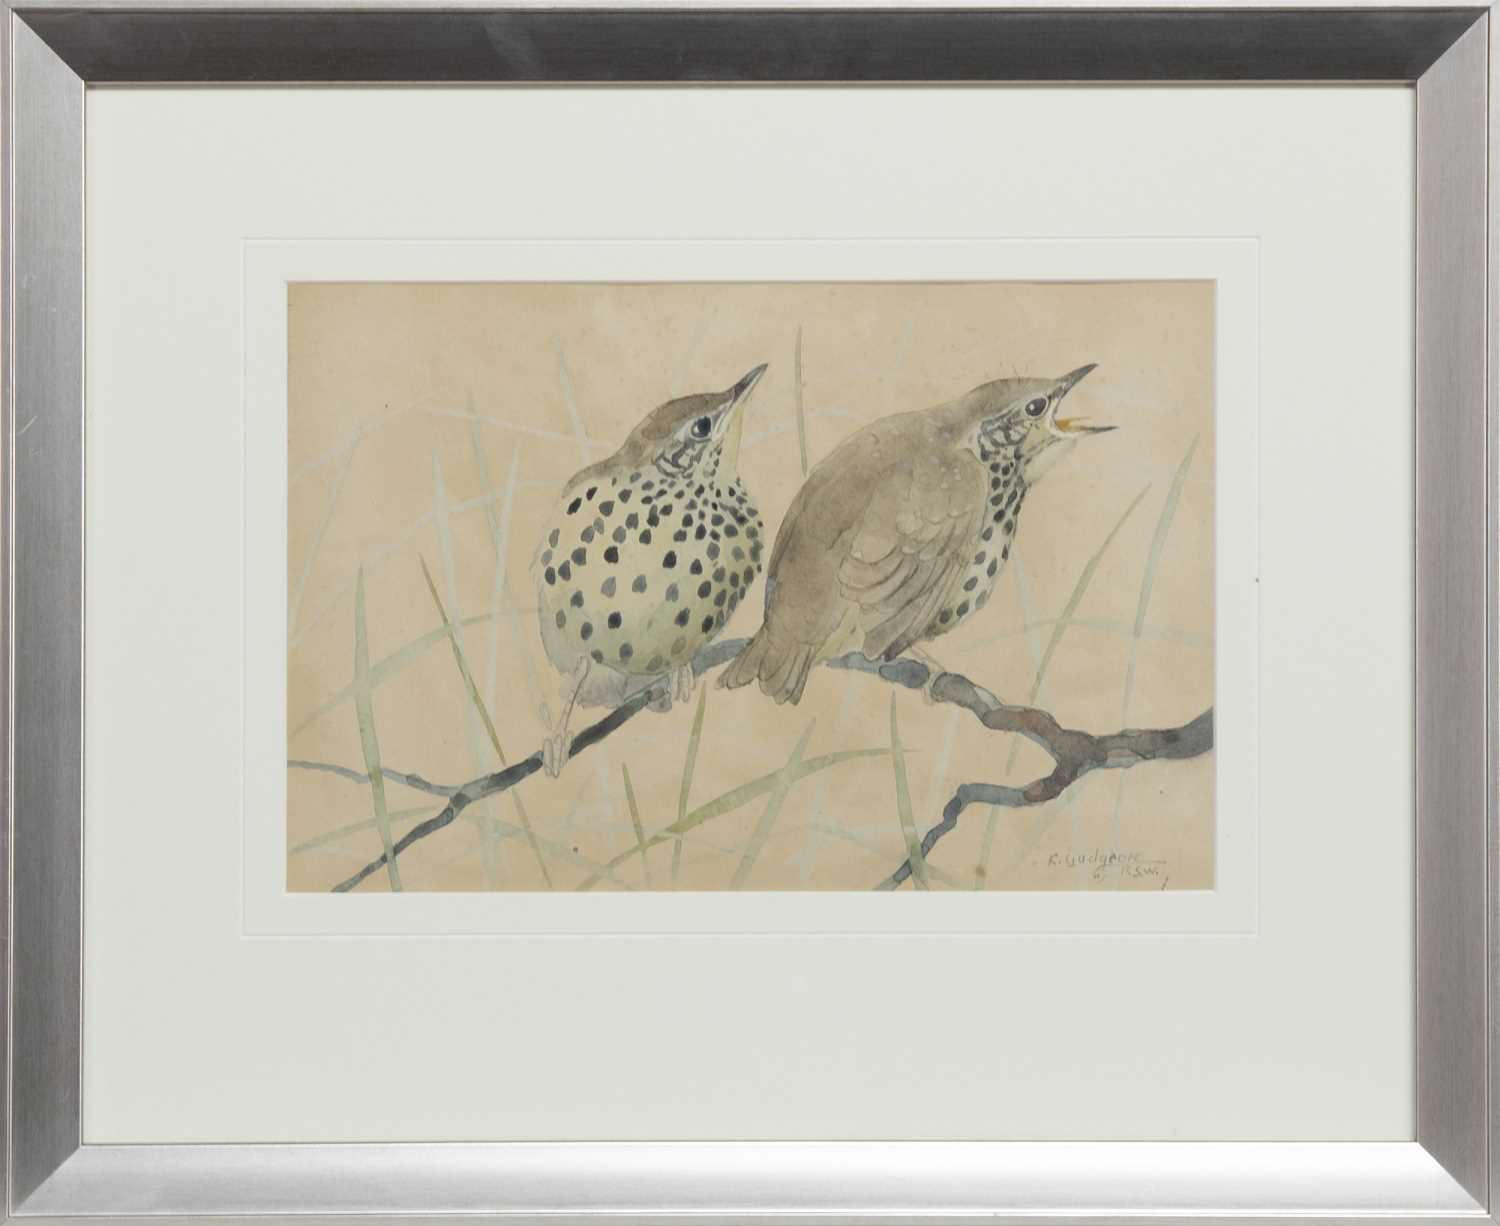 Lot 303 - PAIR OF THRUSHES, A WATERCOLOUR BY RALSTON GUDGEON